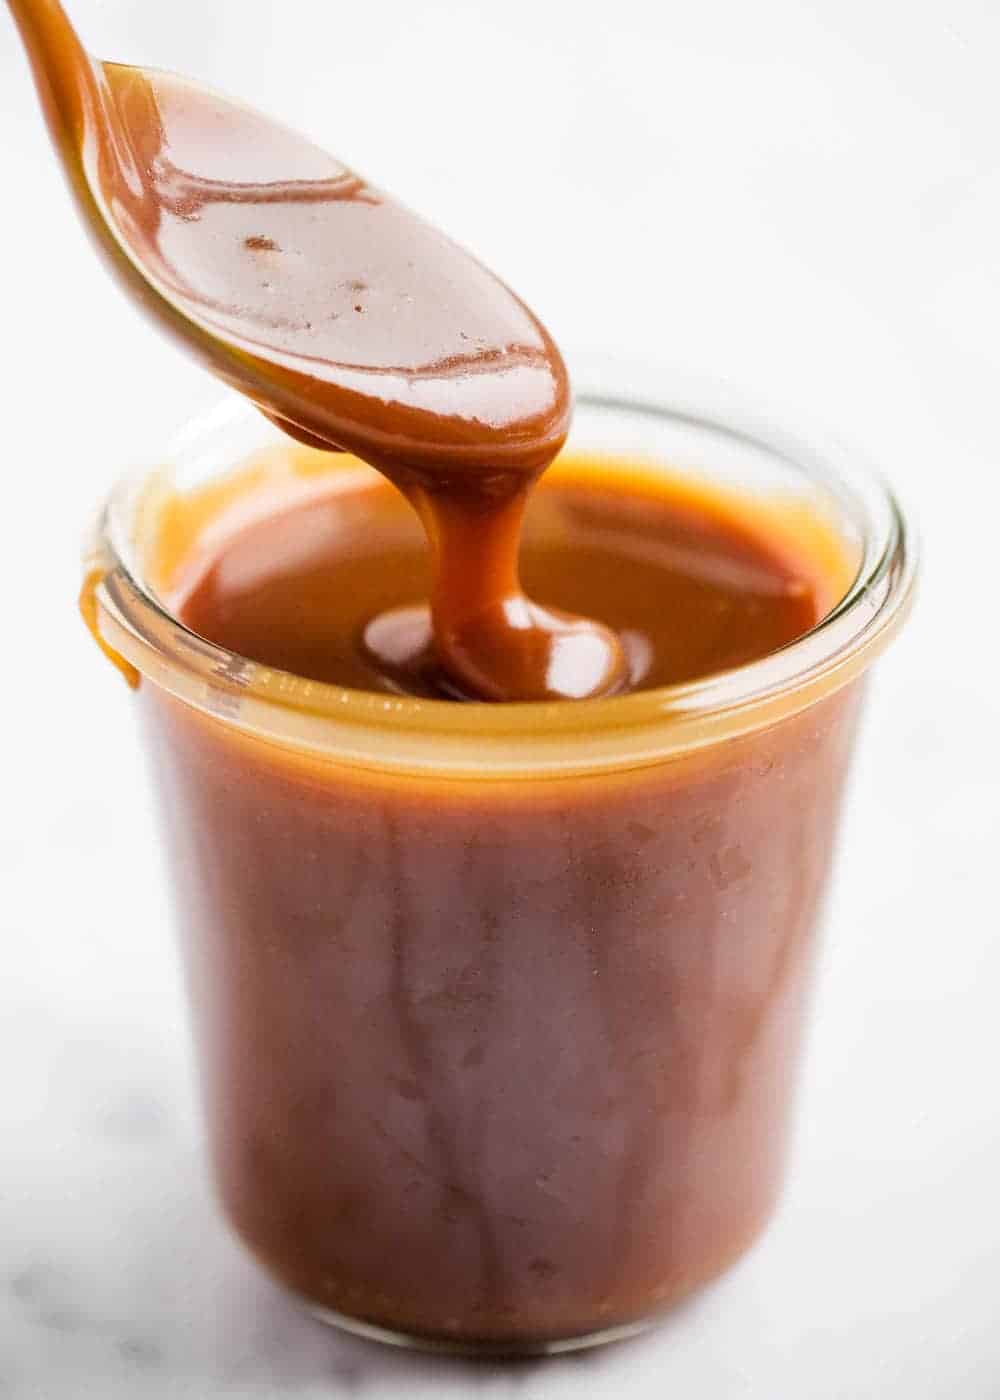 3 Ingredient Caramel Sauce Only 15 Minutes I Heart Naptime,Crochet Granny Square Patterns